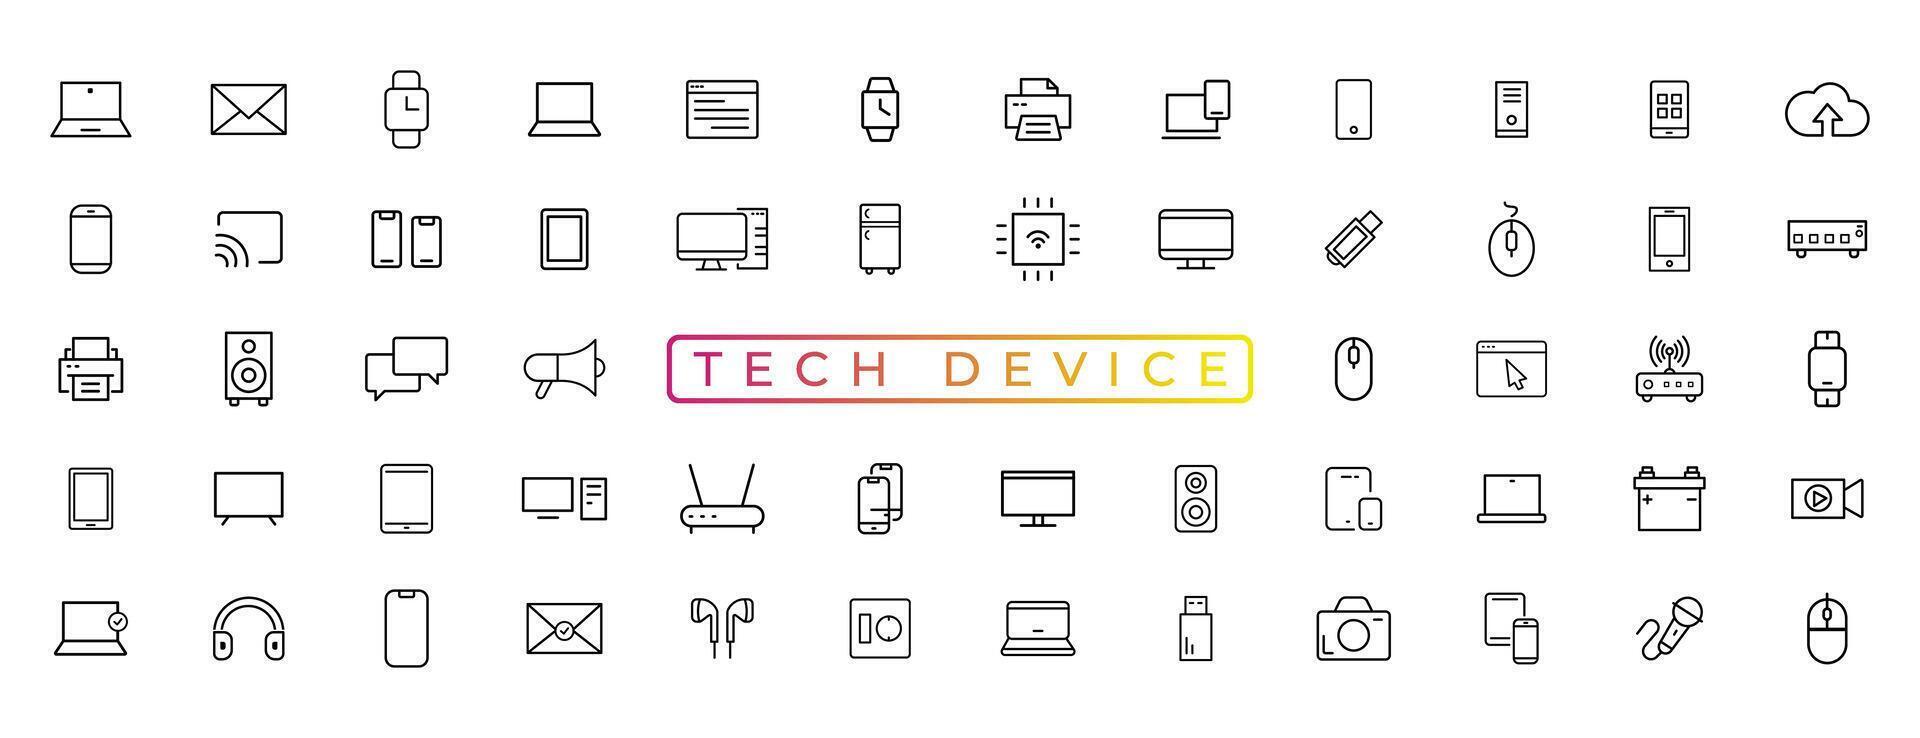 Device and technology line icon set. Electronic devices and gadgets, computer, equipment and electronics. Computer monitor, smartphone, tablet and laptop sumbol collection - stock ... vector